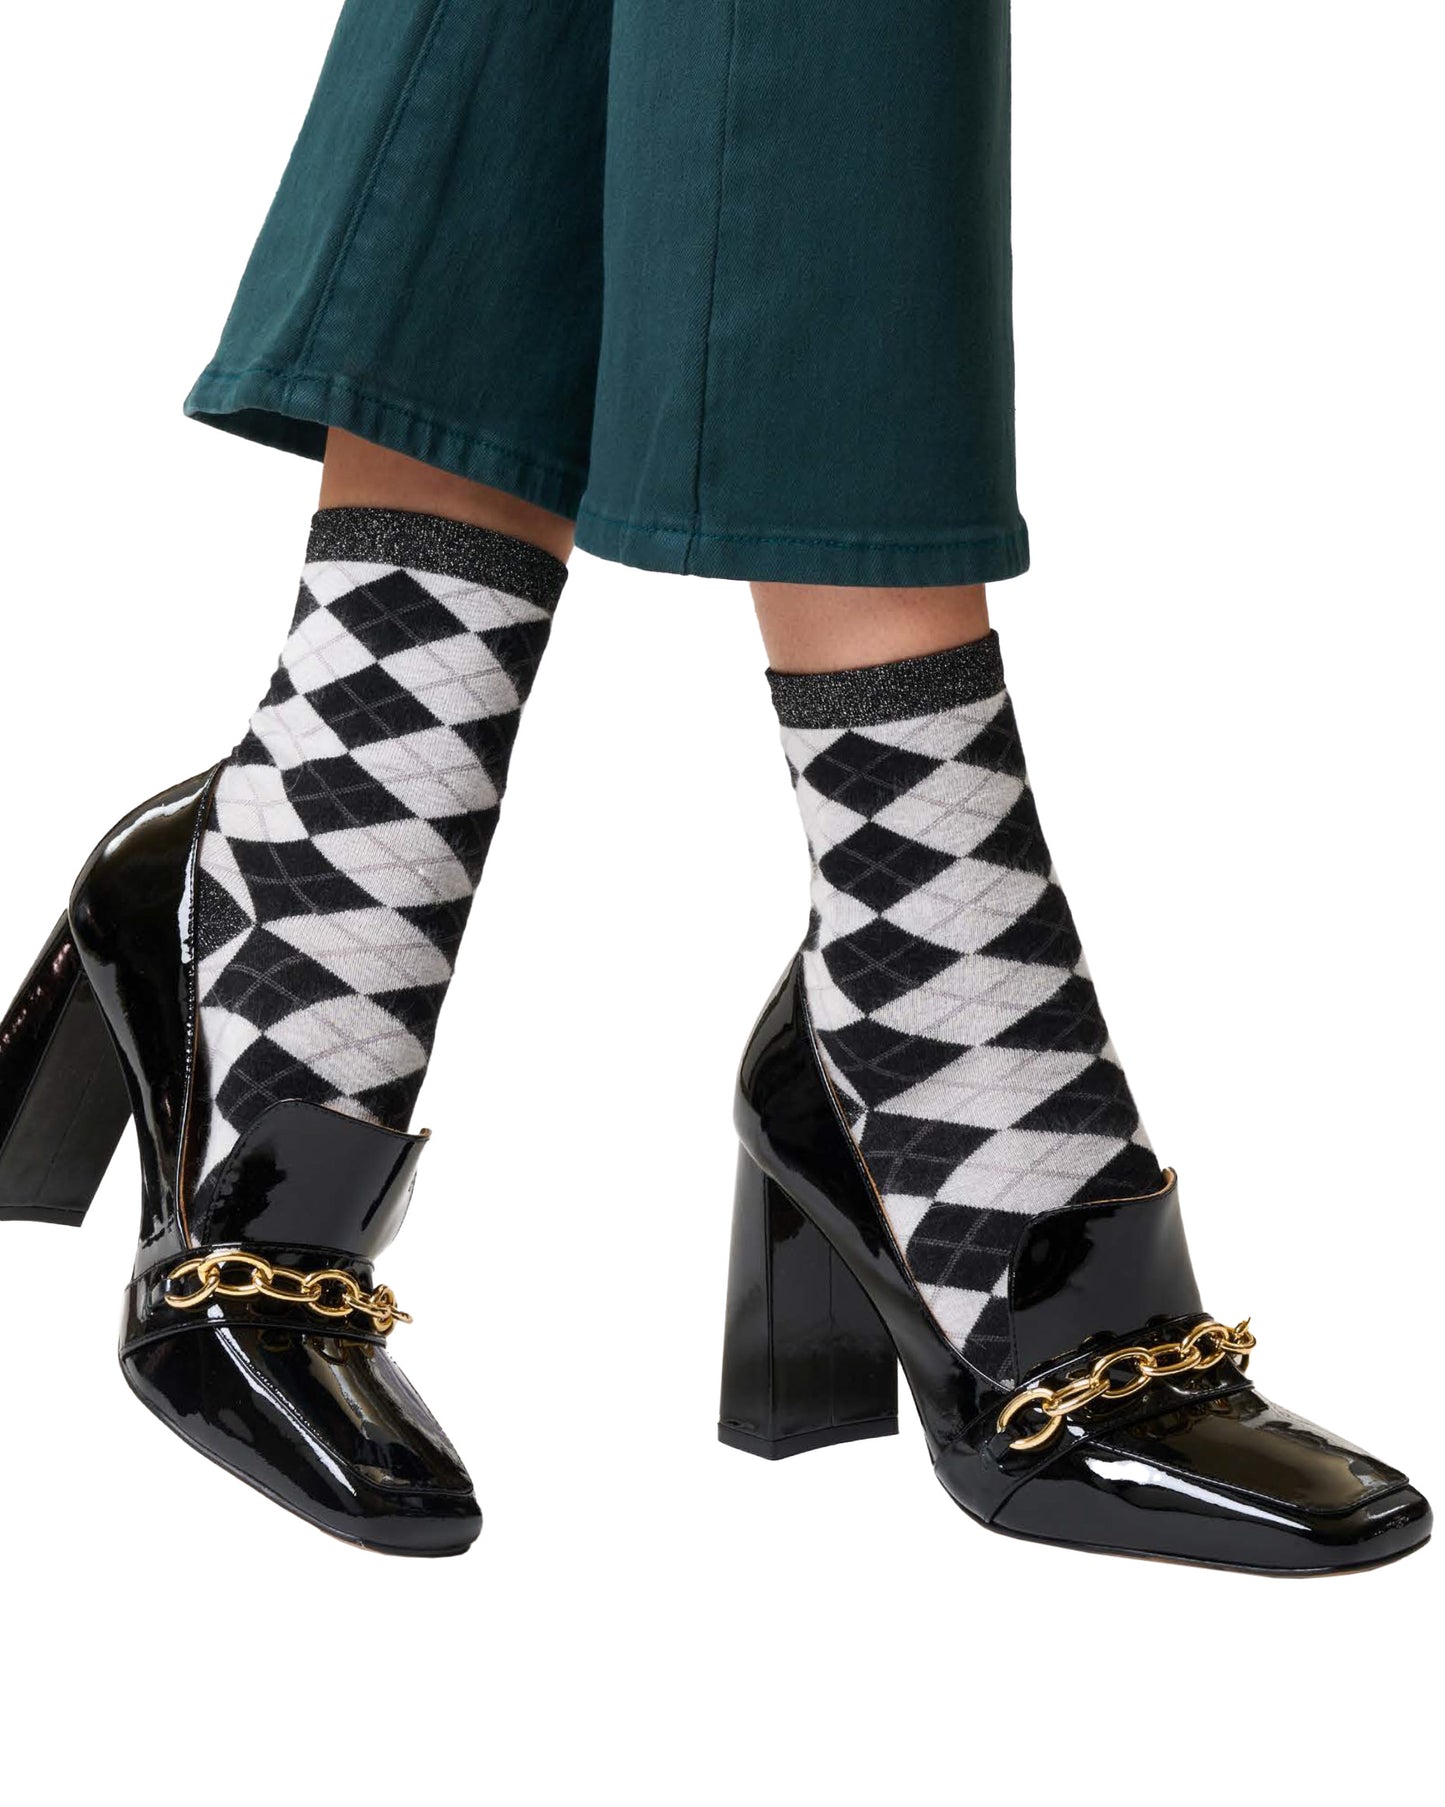 SiSi Scottish Calzino - Warm and soft angora mix ankle socks with a diamond tartan / argyle pattern in black and light grey with silver lurex.